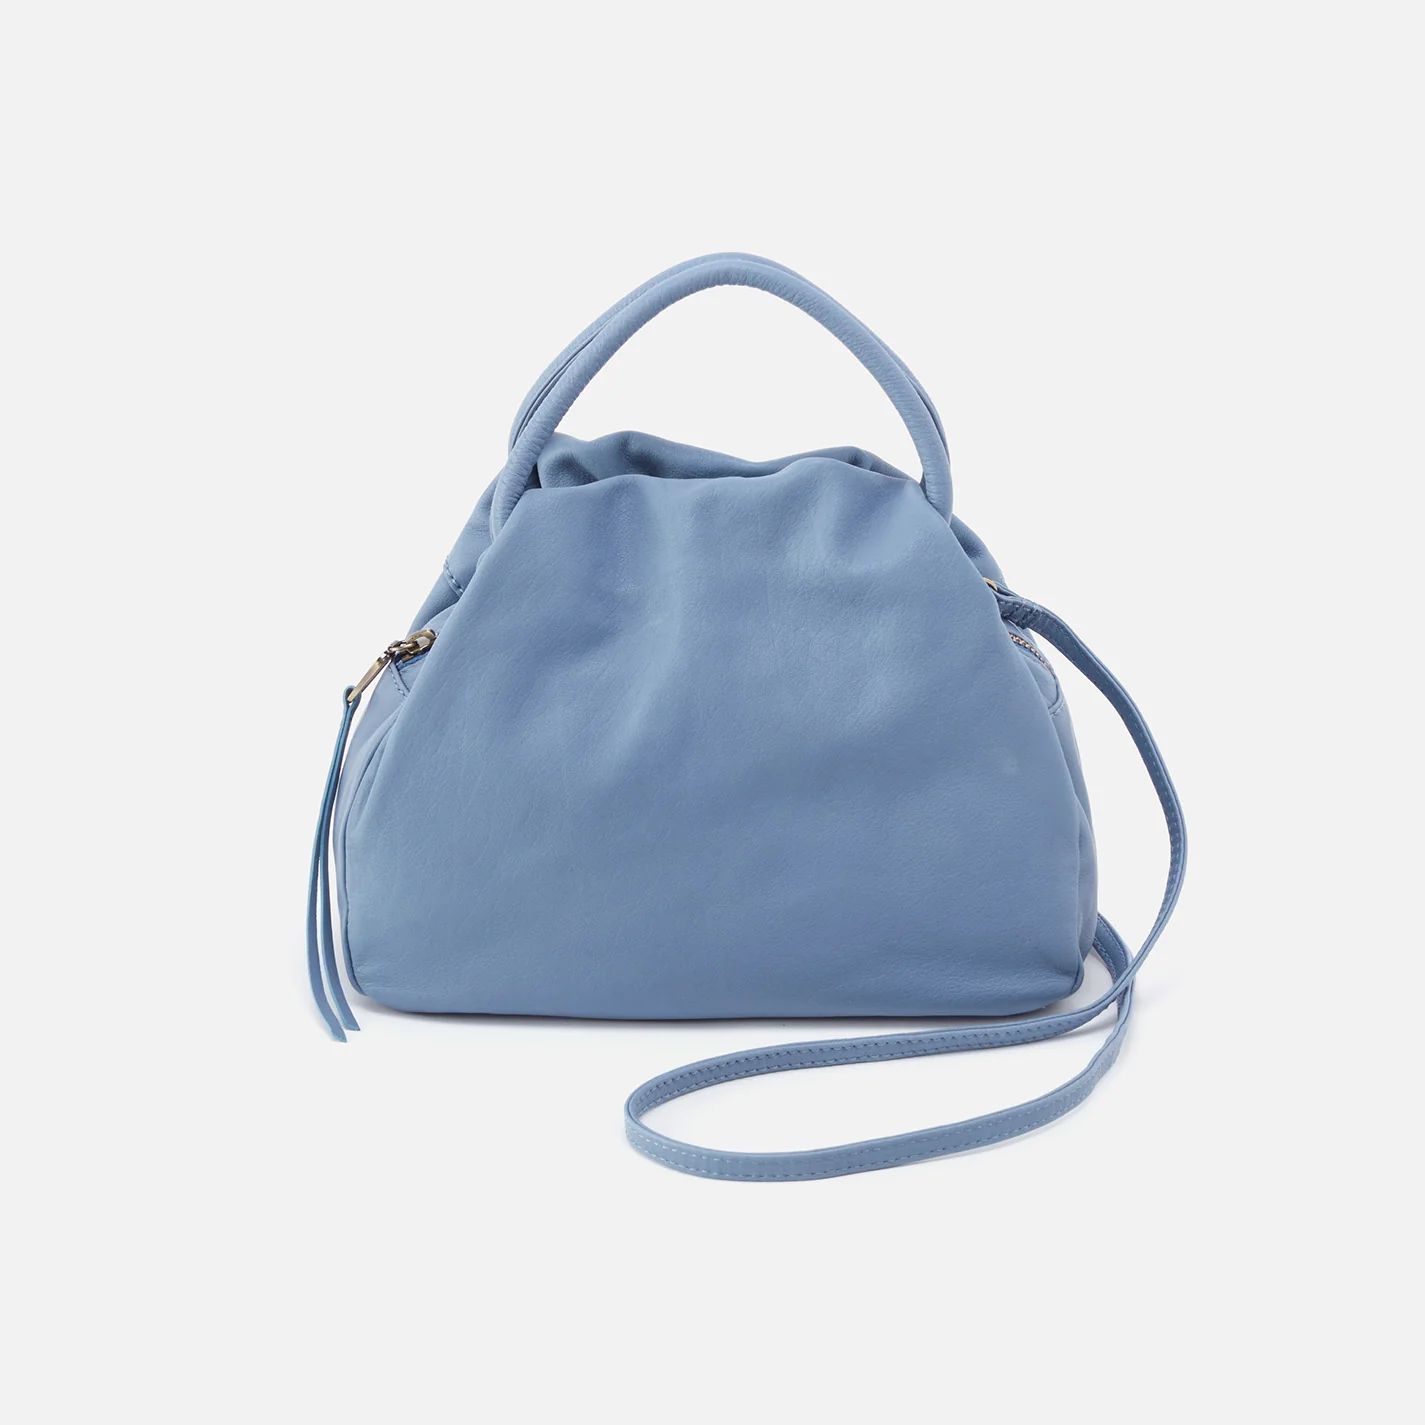 Darling Small Satchel in Soft Leather - Provence | HOBO Bags